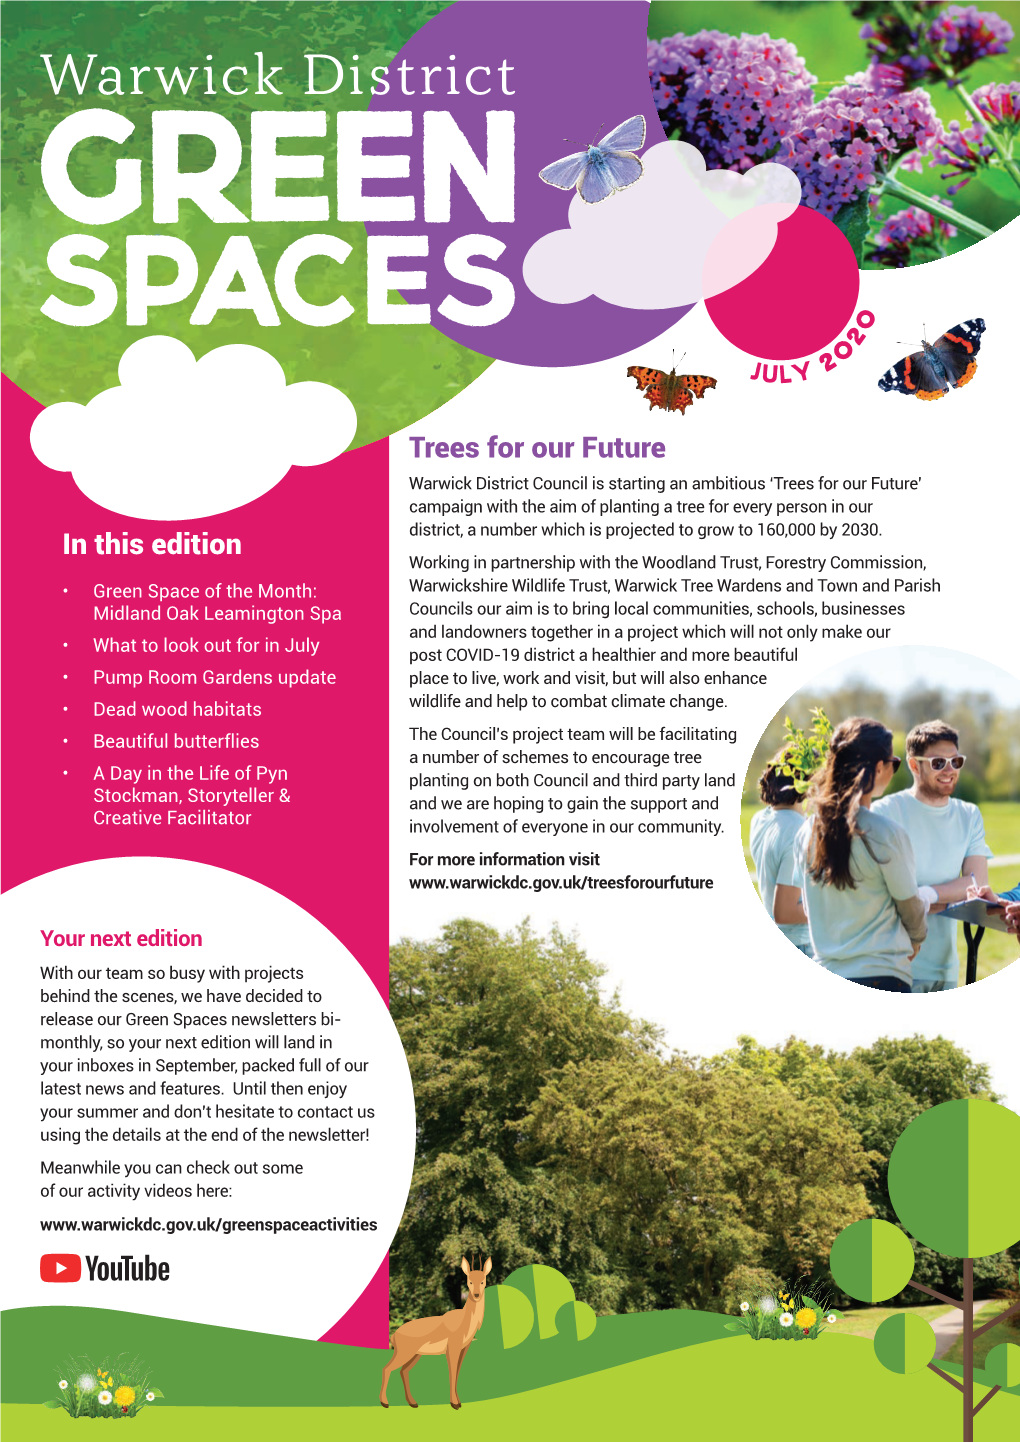 Green Spaces Newsletters Bi- Monthly, So Your Next Edition Will Land in Your Inboxes in September, Packed Full of Our Latest News and Features